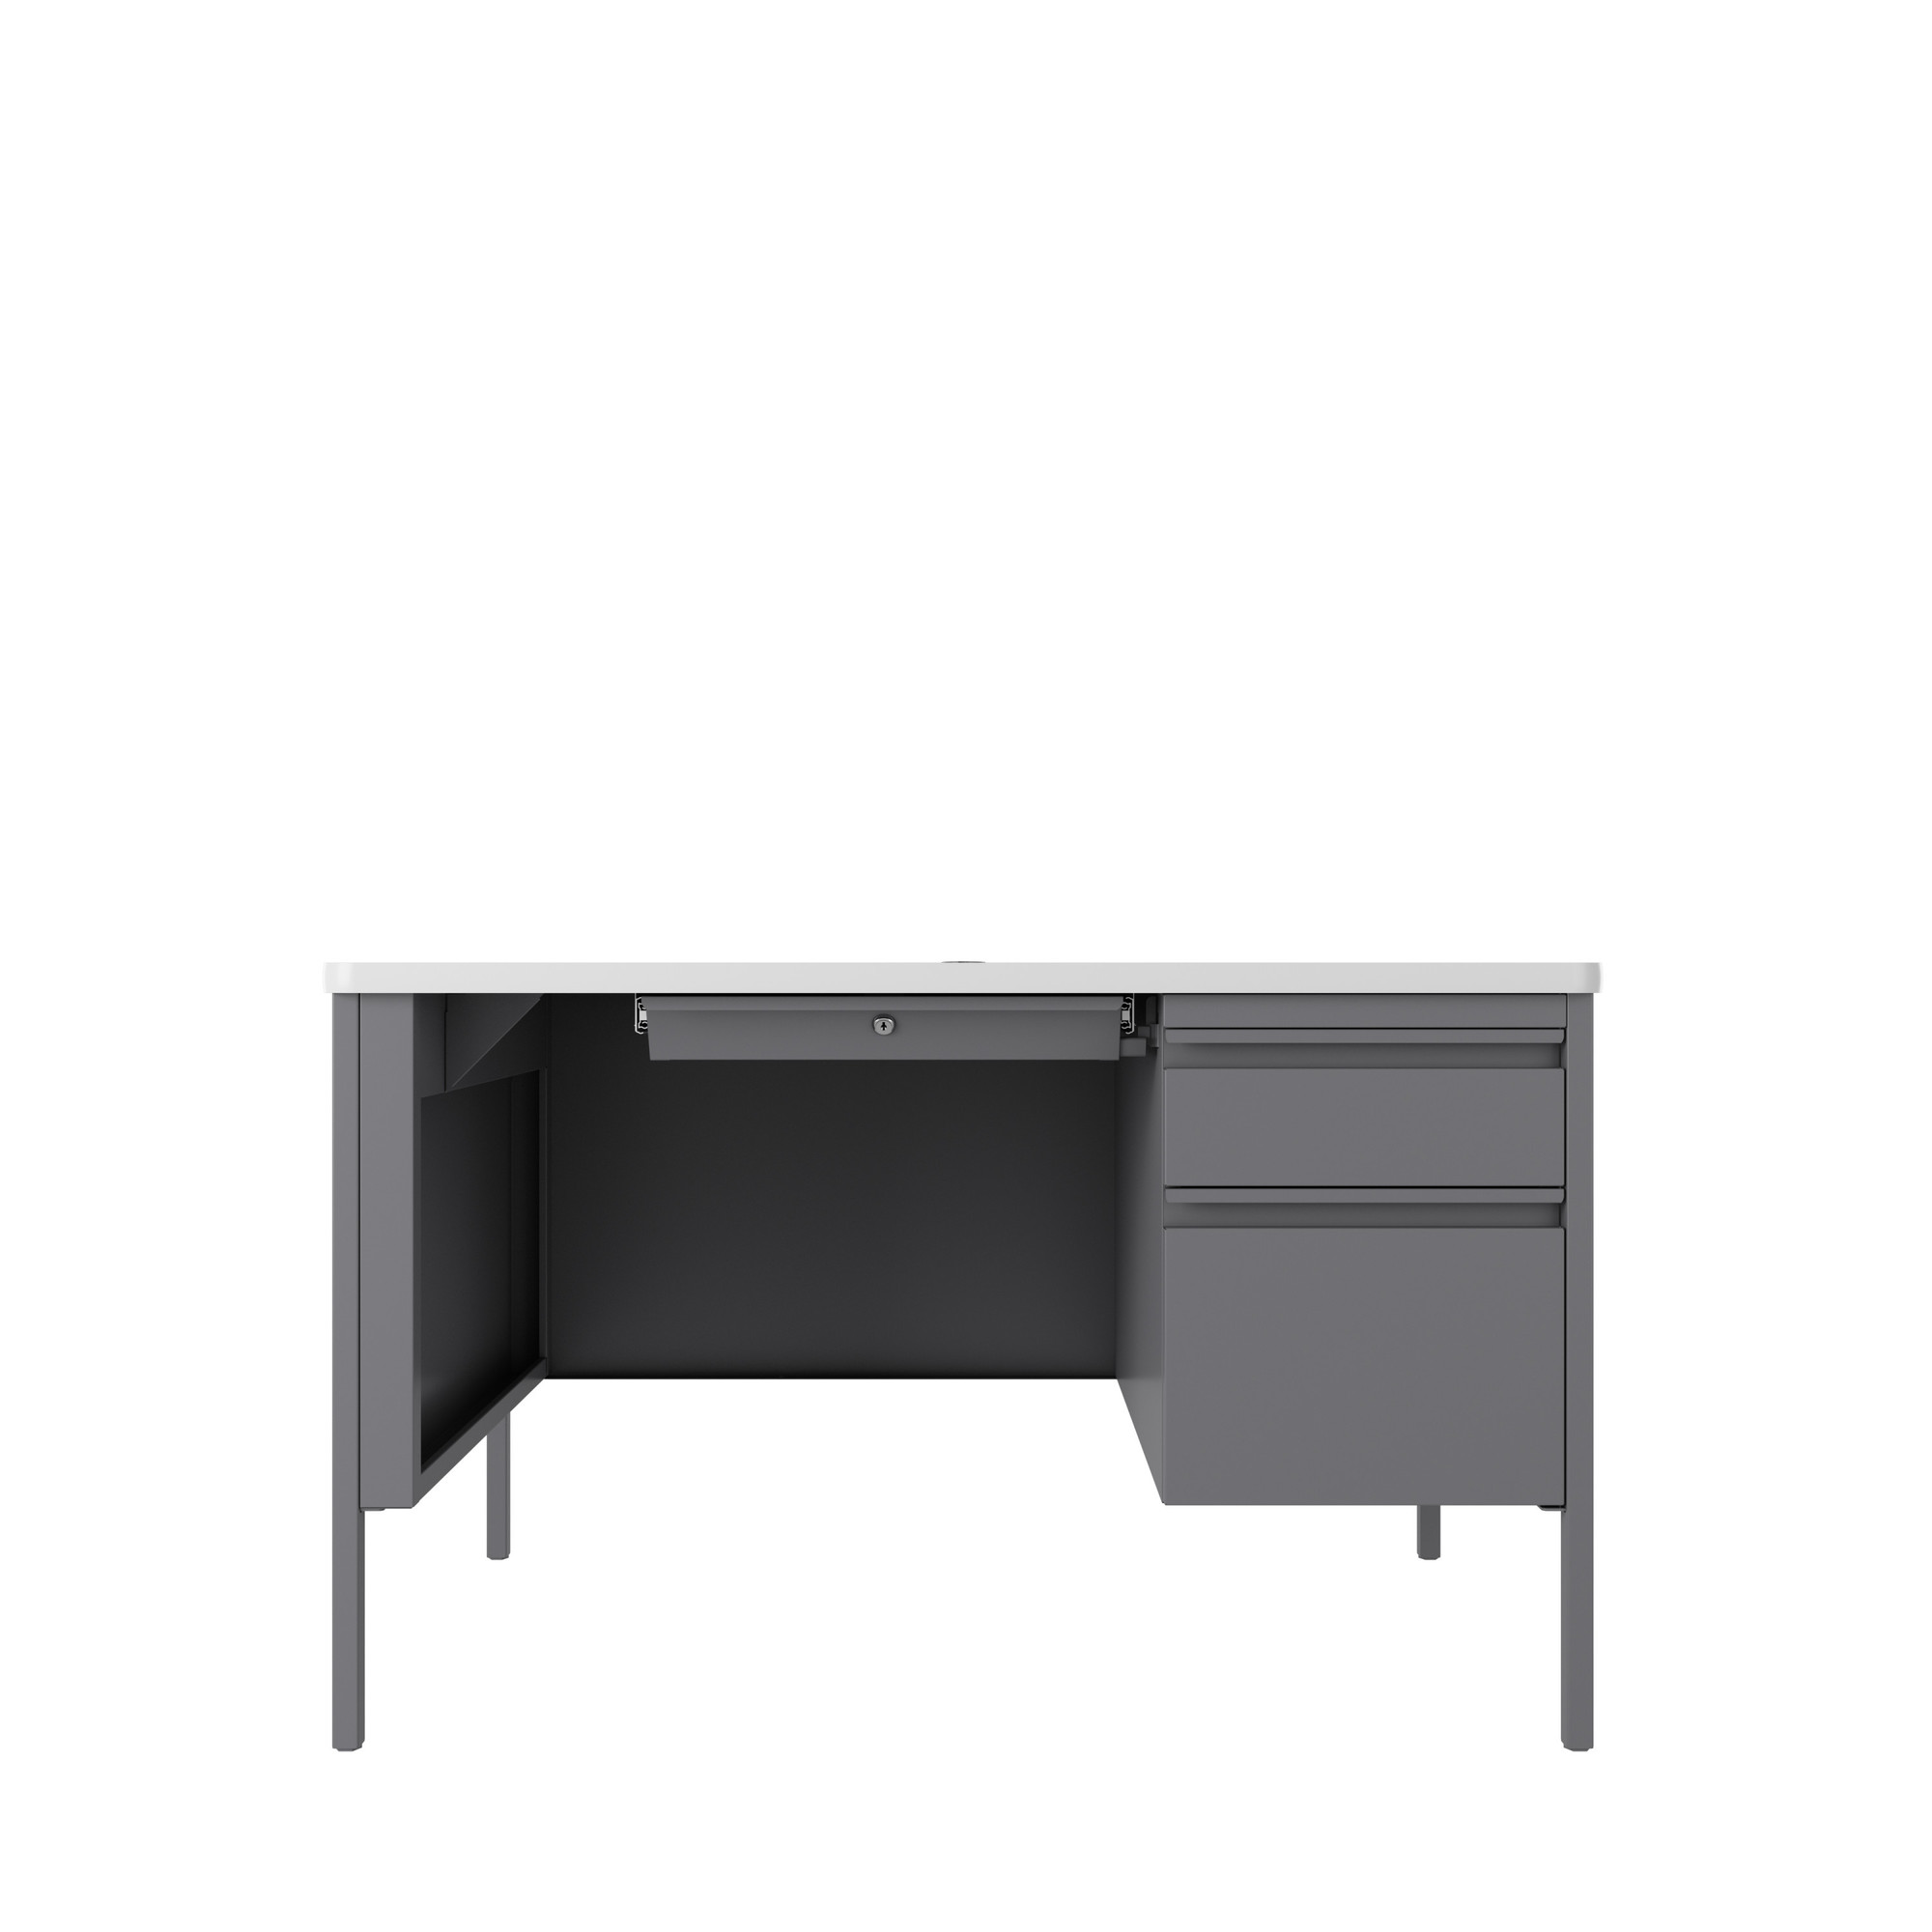 Hirsh Industries, Right Hand File Office Desk w/ Rounded T-Mold Top, Width 48 in, Height 29.5 in, Depth 30 in, Model 22653